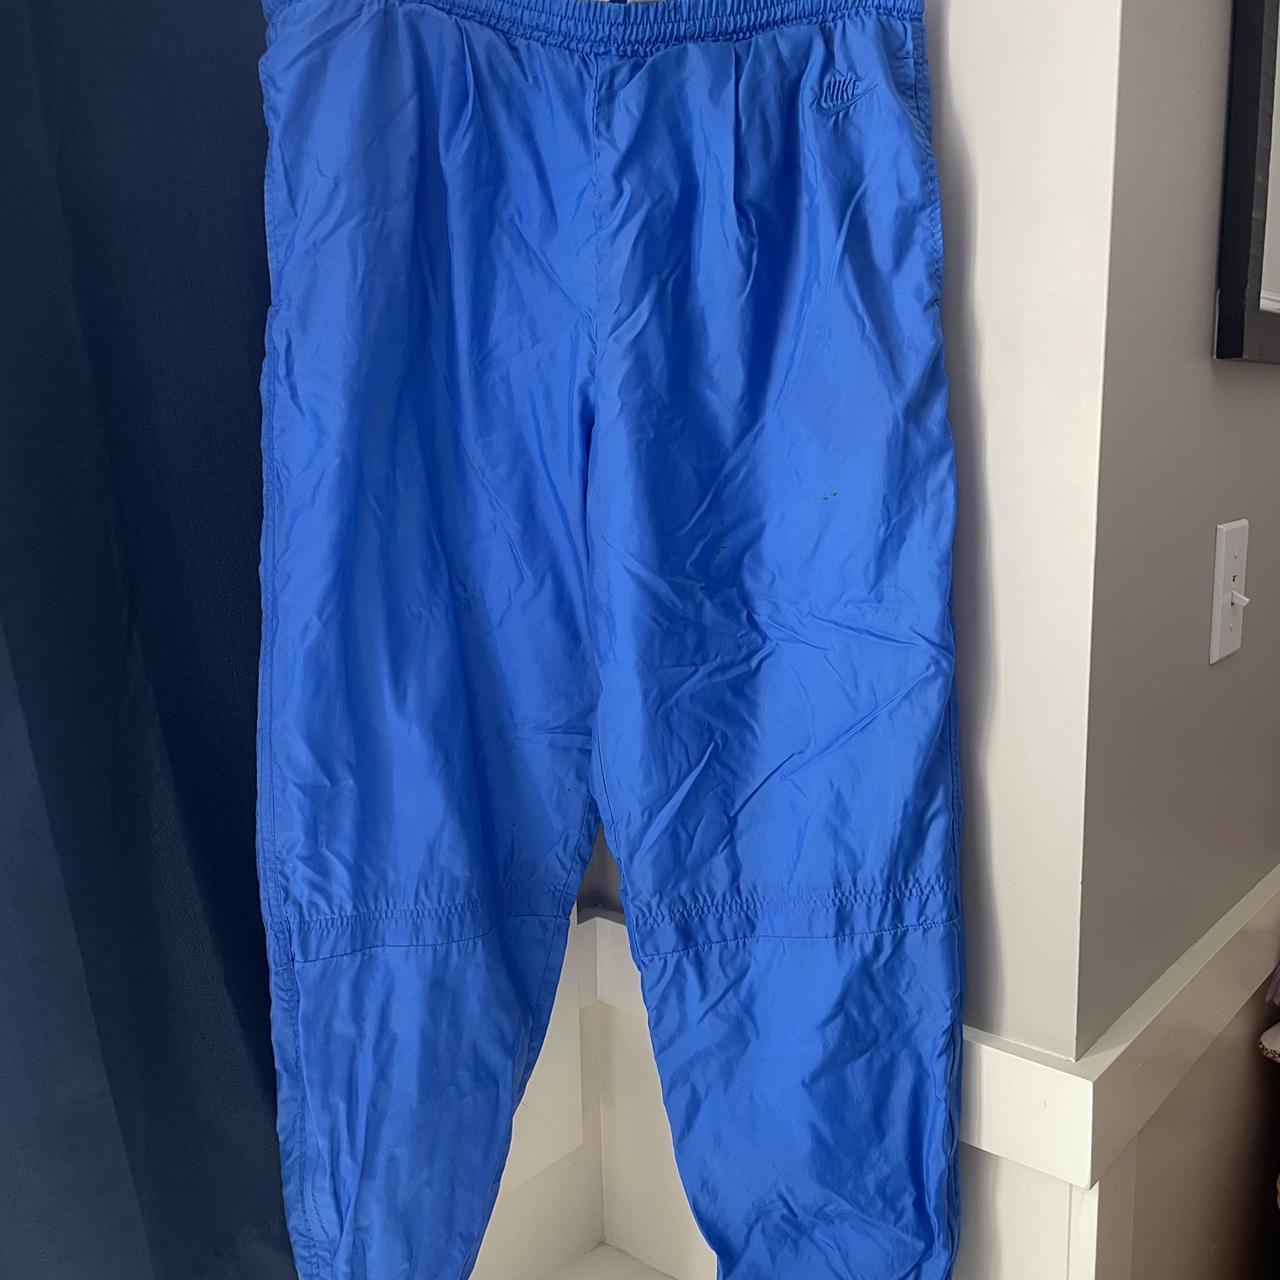 Electric blue Vintage nike track pants. These are in